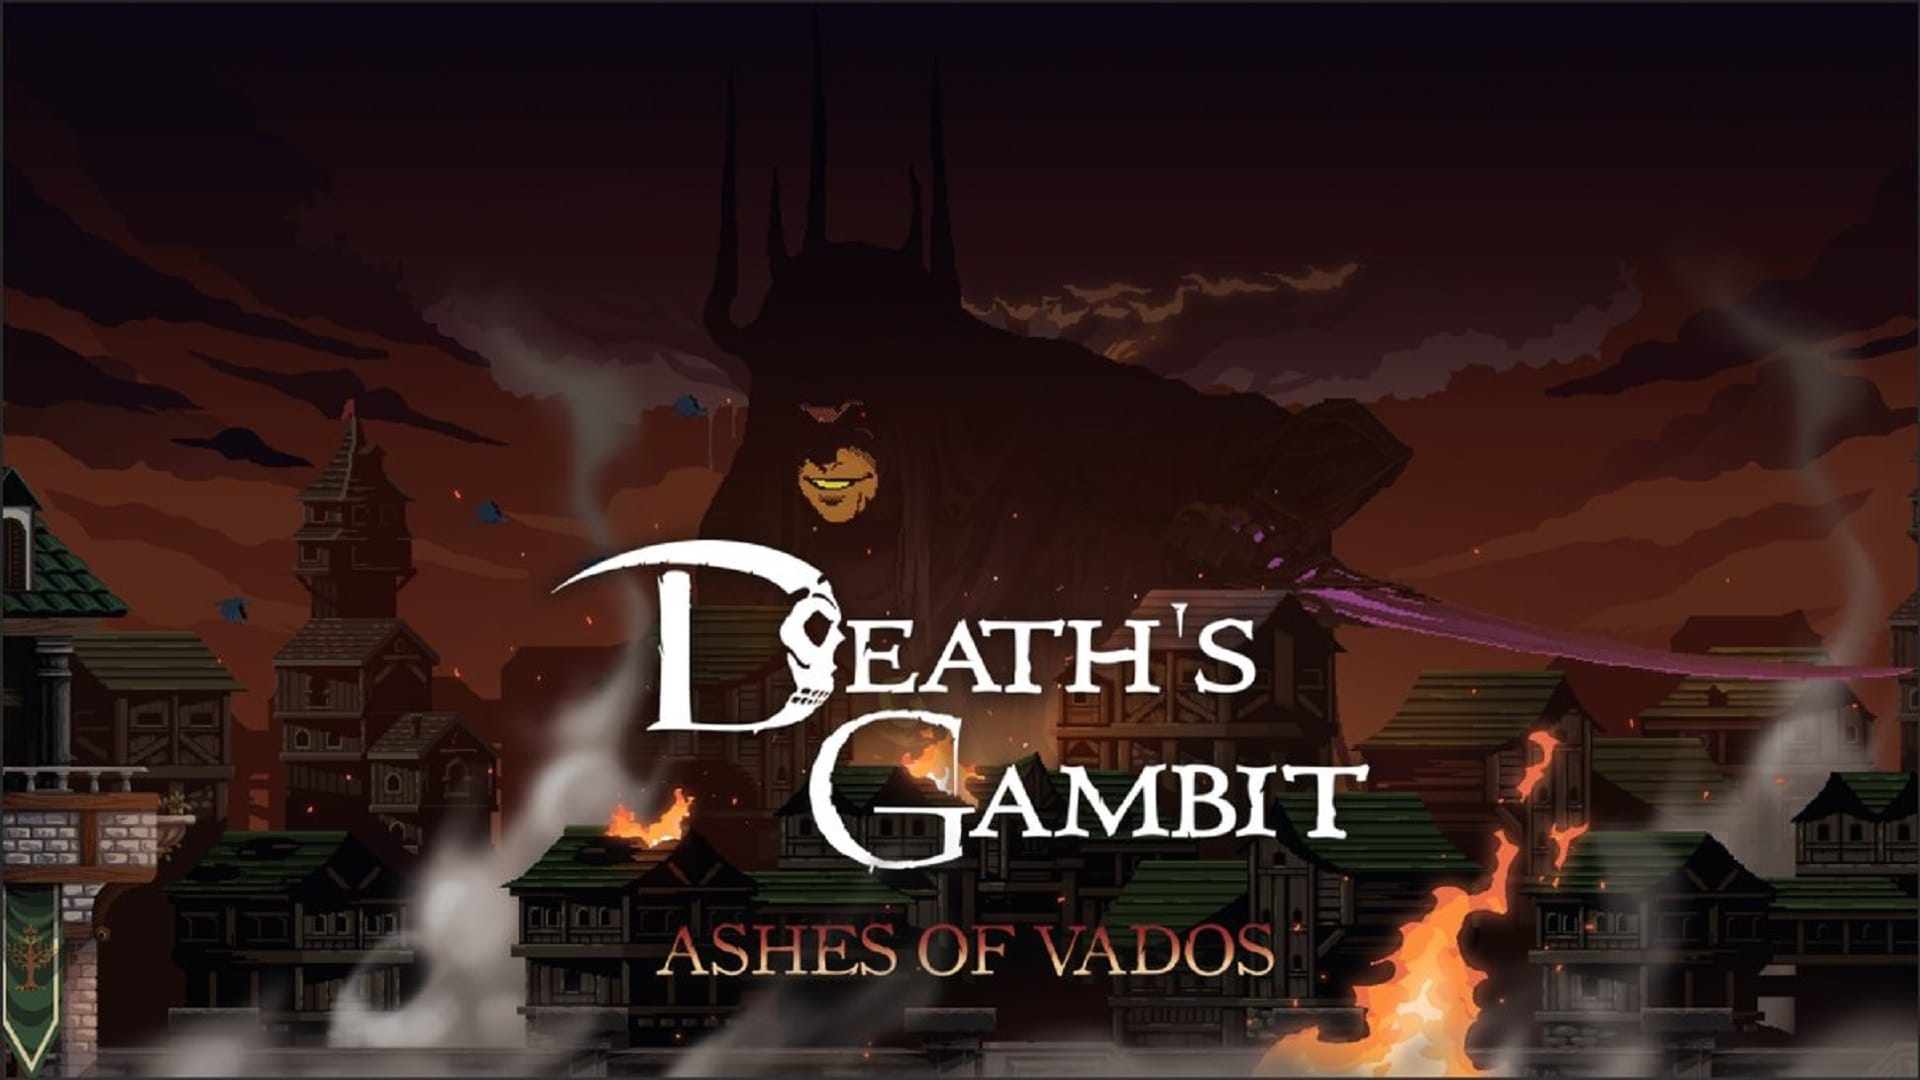 Death's Gambit: Afterlife PC Review 